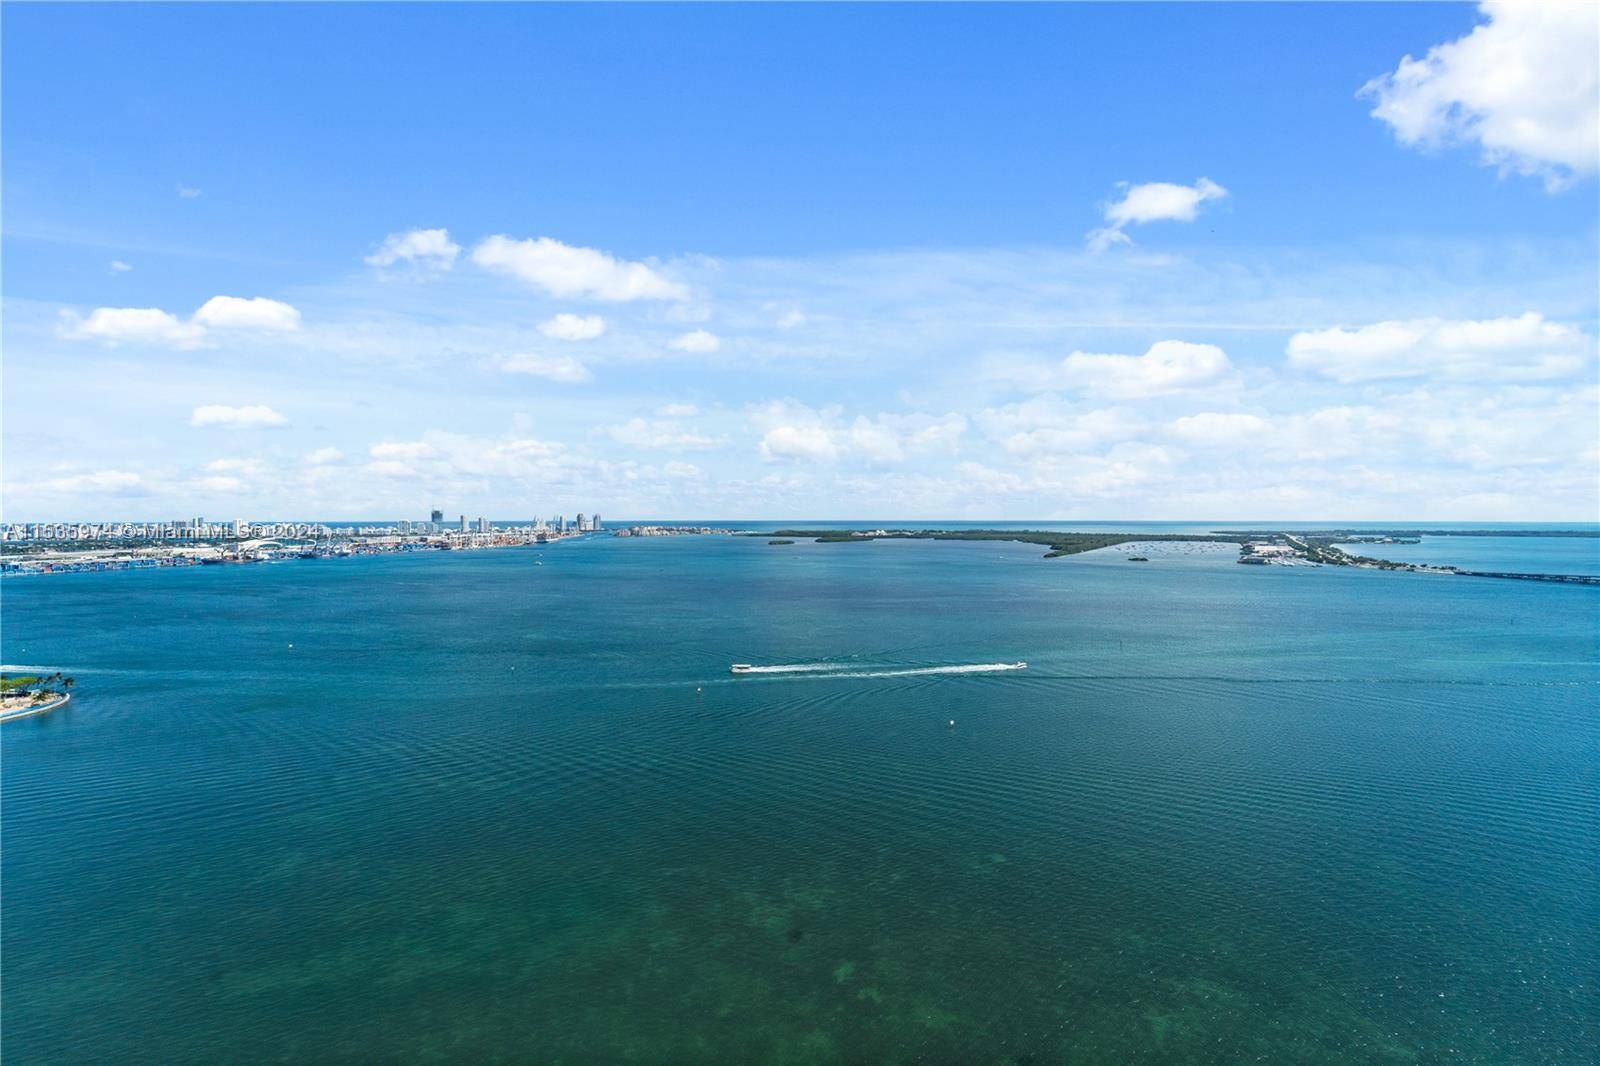 Priced to sell ! Tessi Garcia designed turnkey 2 Bed Den 3 Bath with breathtaking water views located right on the bay in the heart of Brickell.